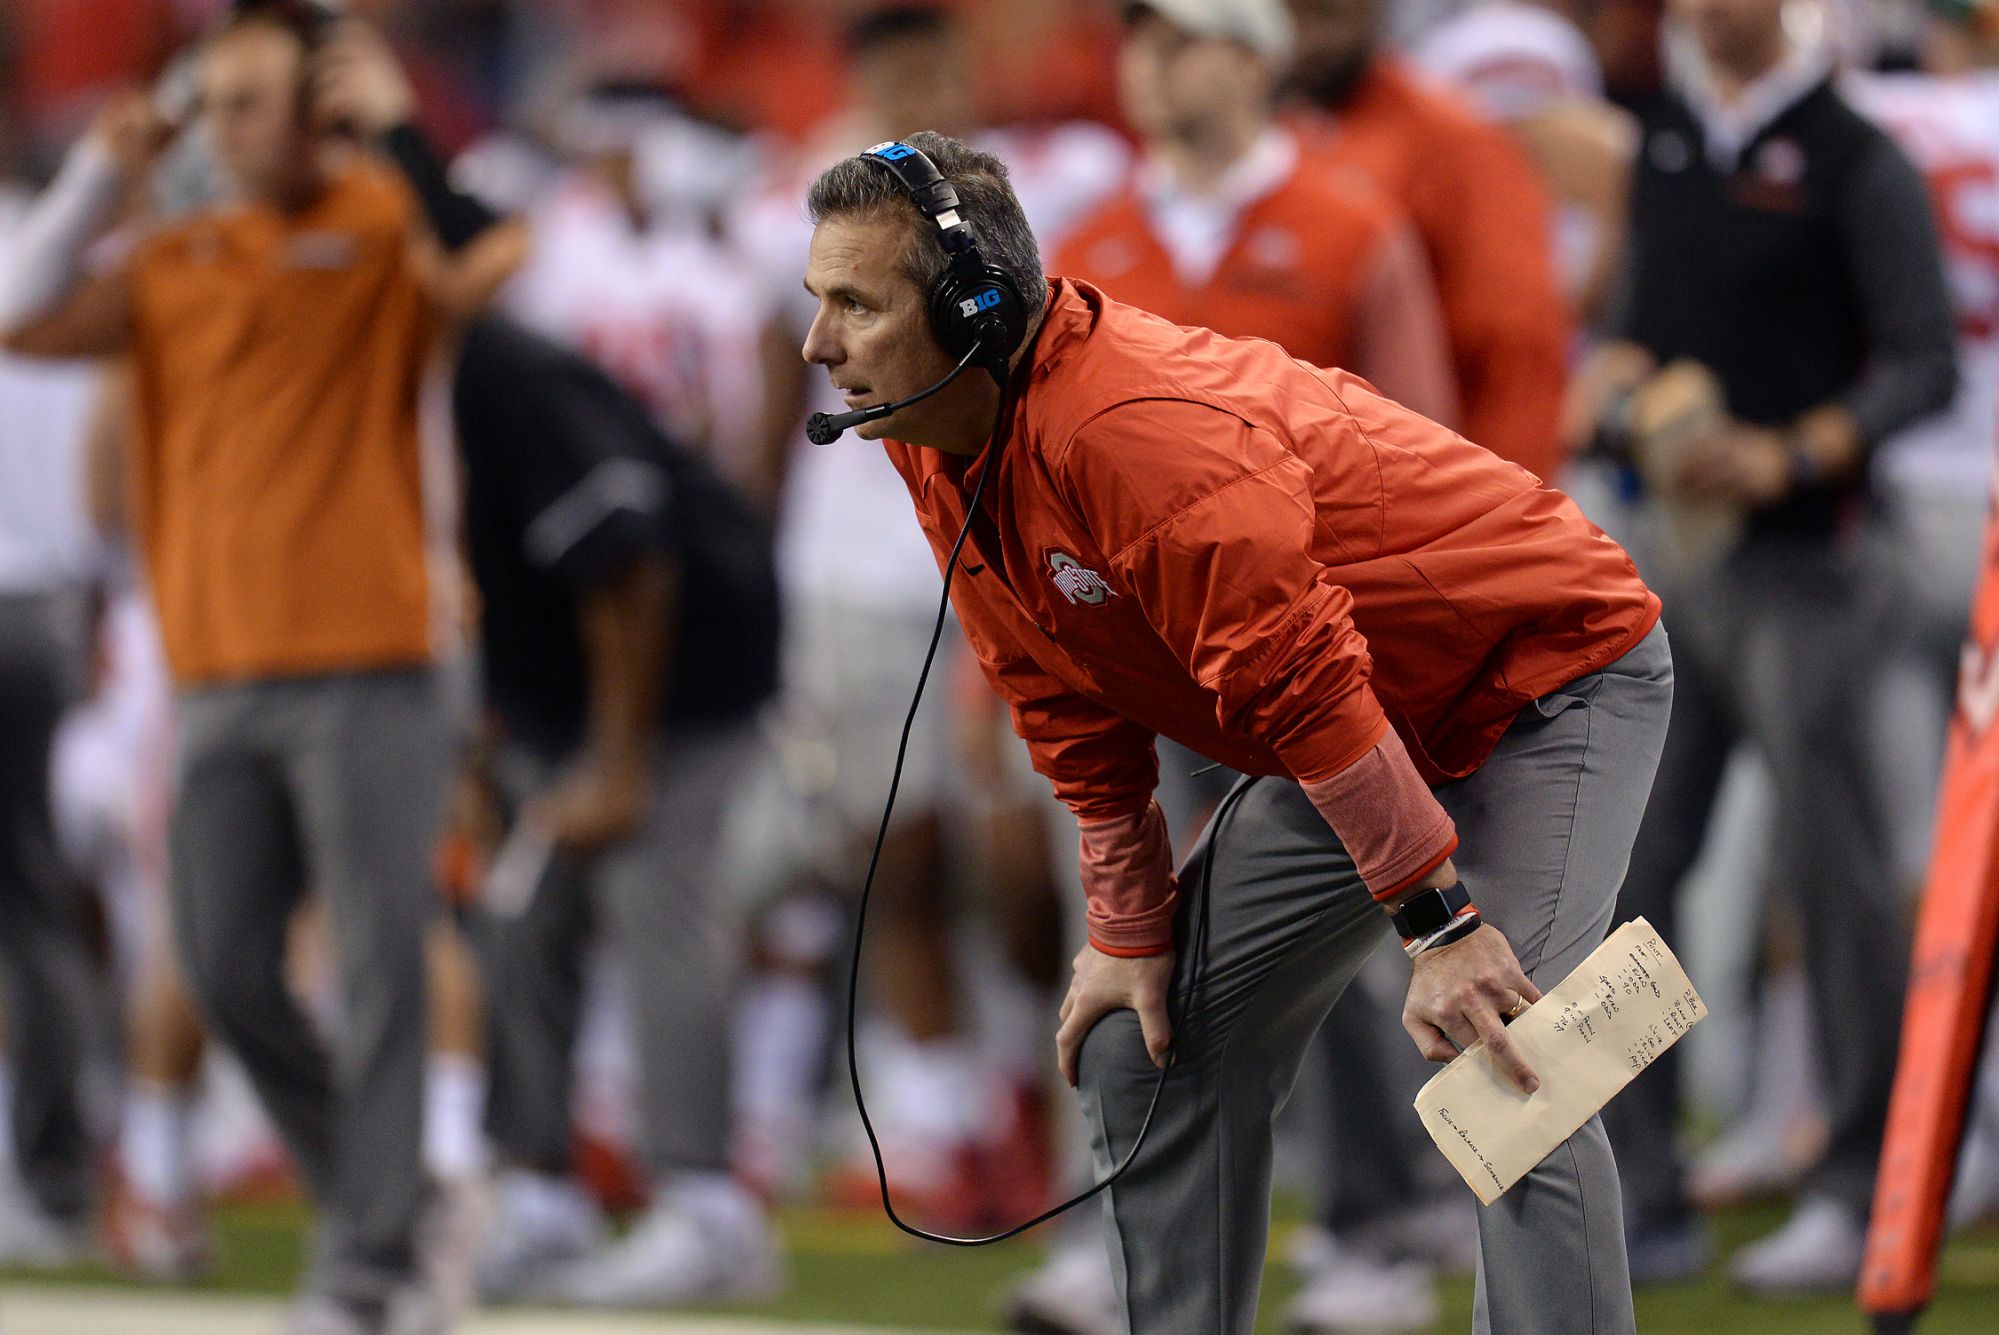 Should Jaguars make annual $12M gamble on Urban Meyer? Here’s why he has a shot in NFL.